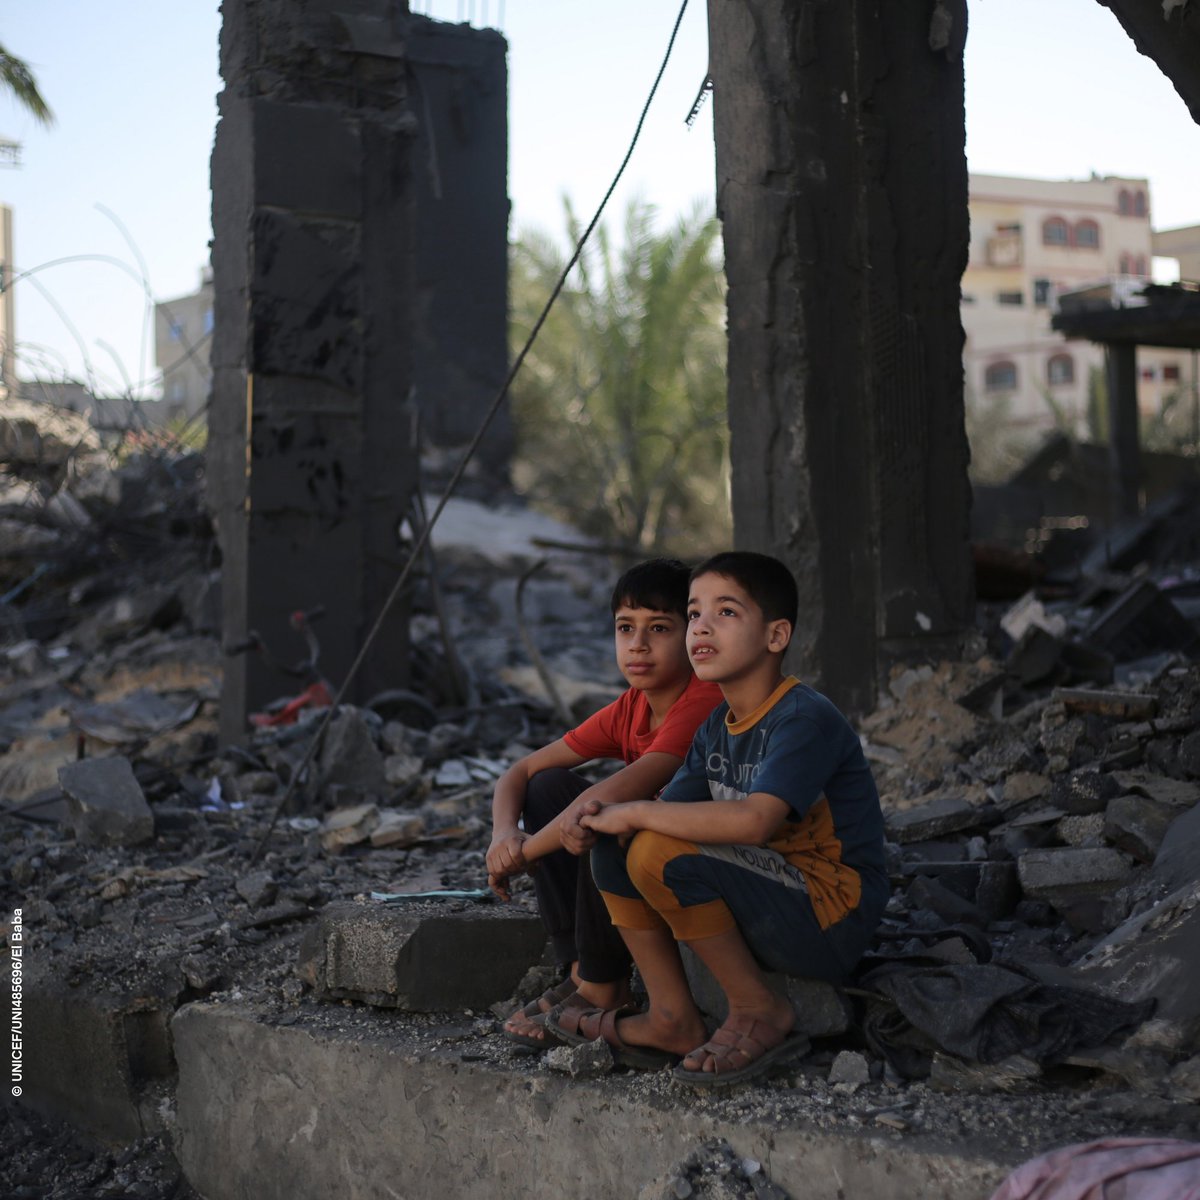 #Gaza is the most dangerous place in the world to be a child. Entire neighbourhoods, where children used to play and go to school have been destroyed. Education was disrupted, water and sanitation threatened, and health services compromised. (1/2)